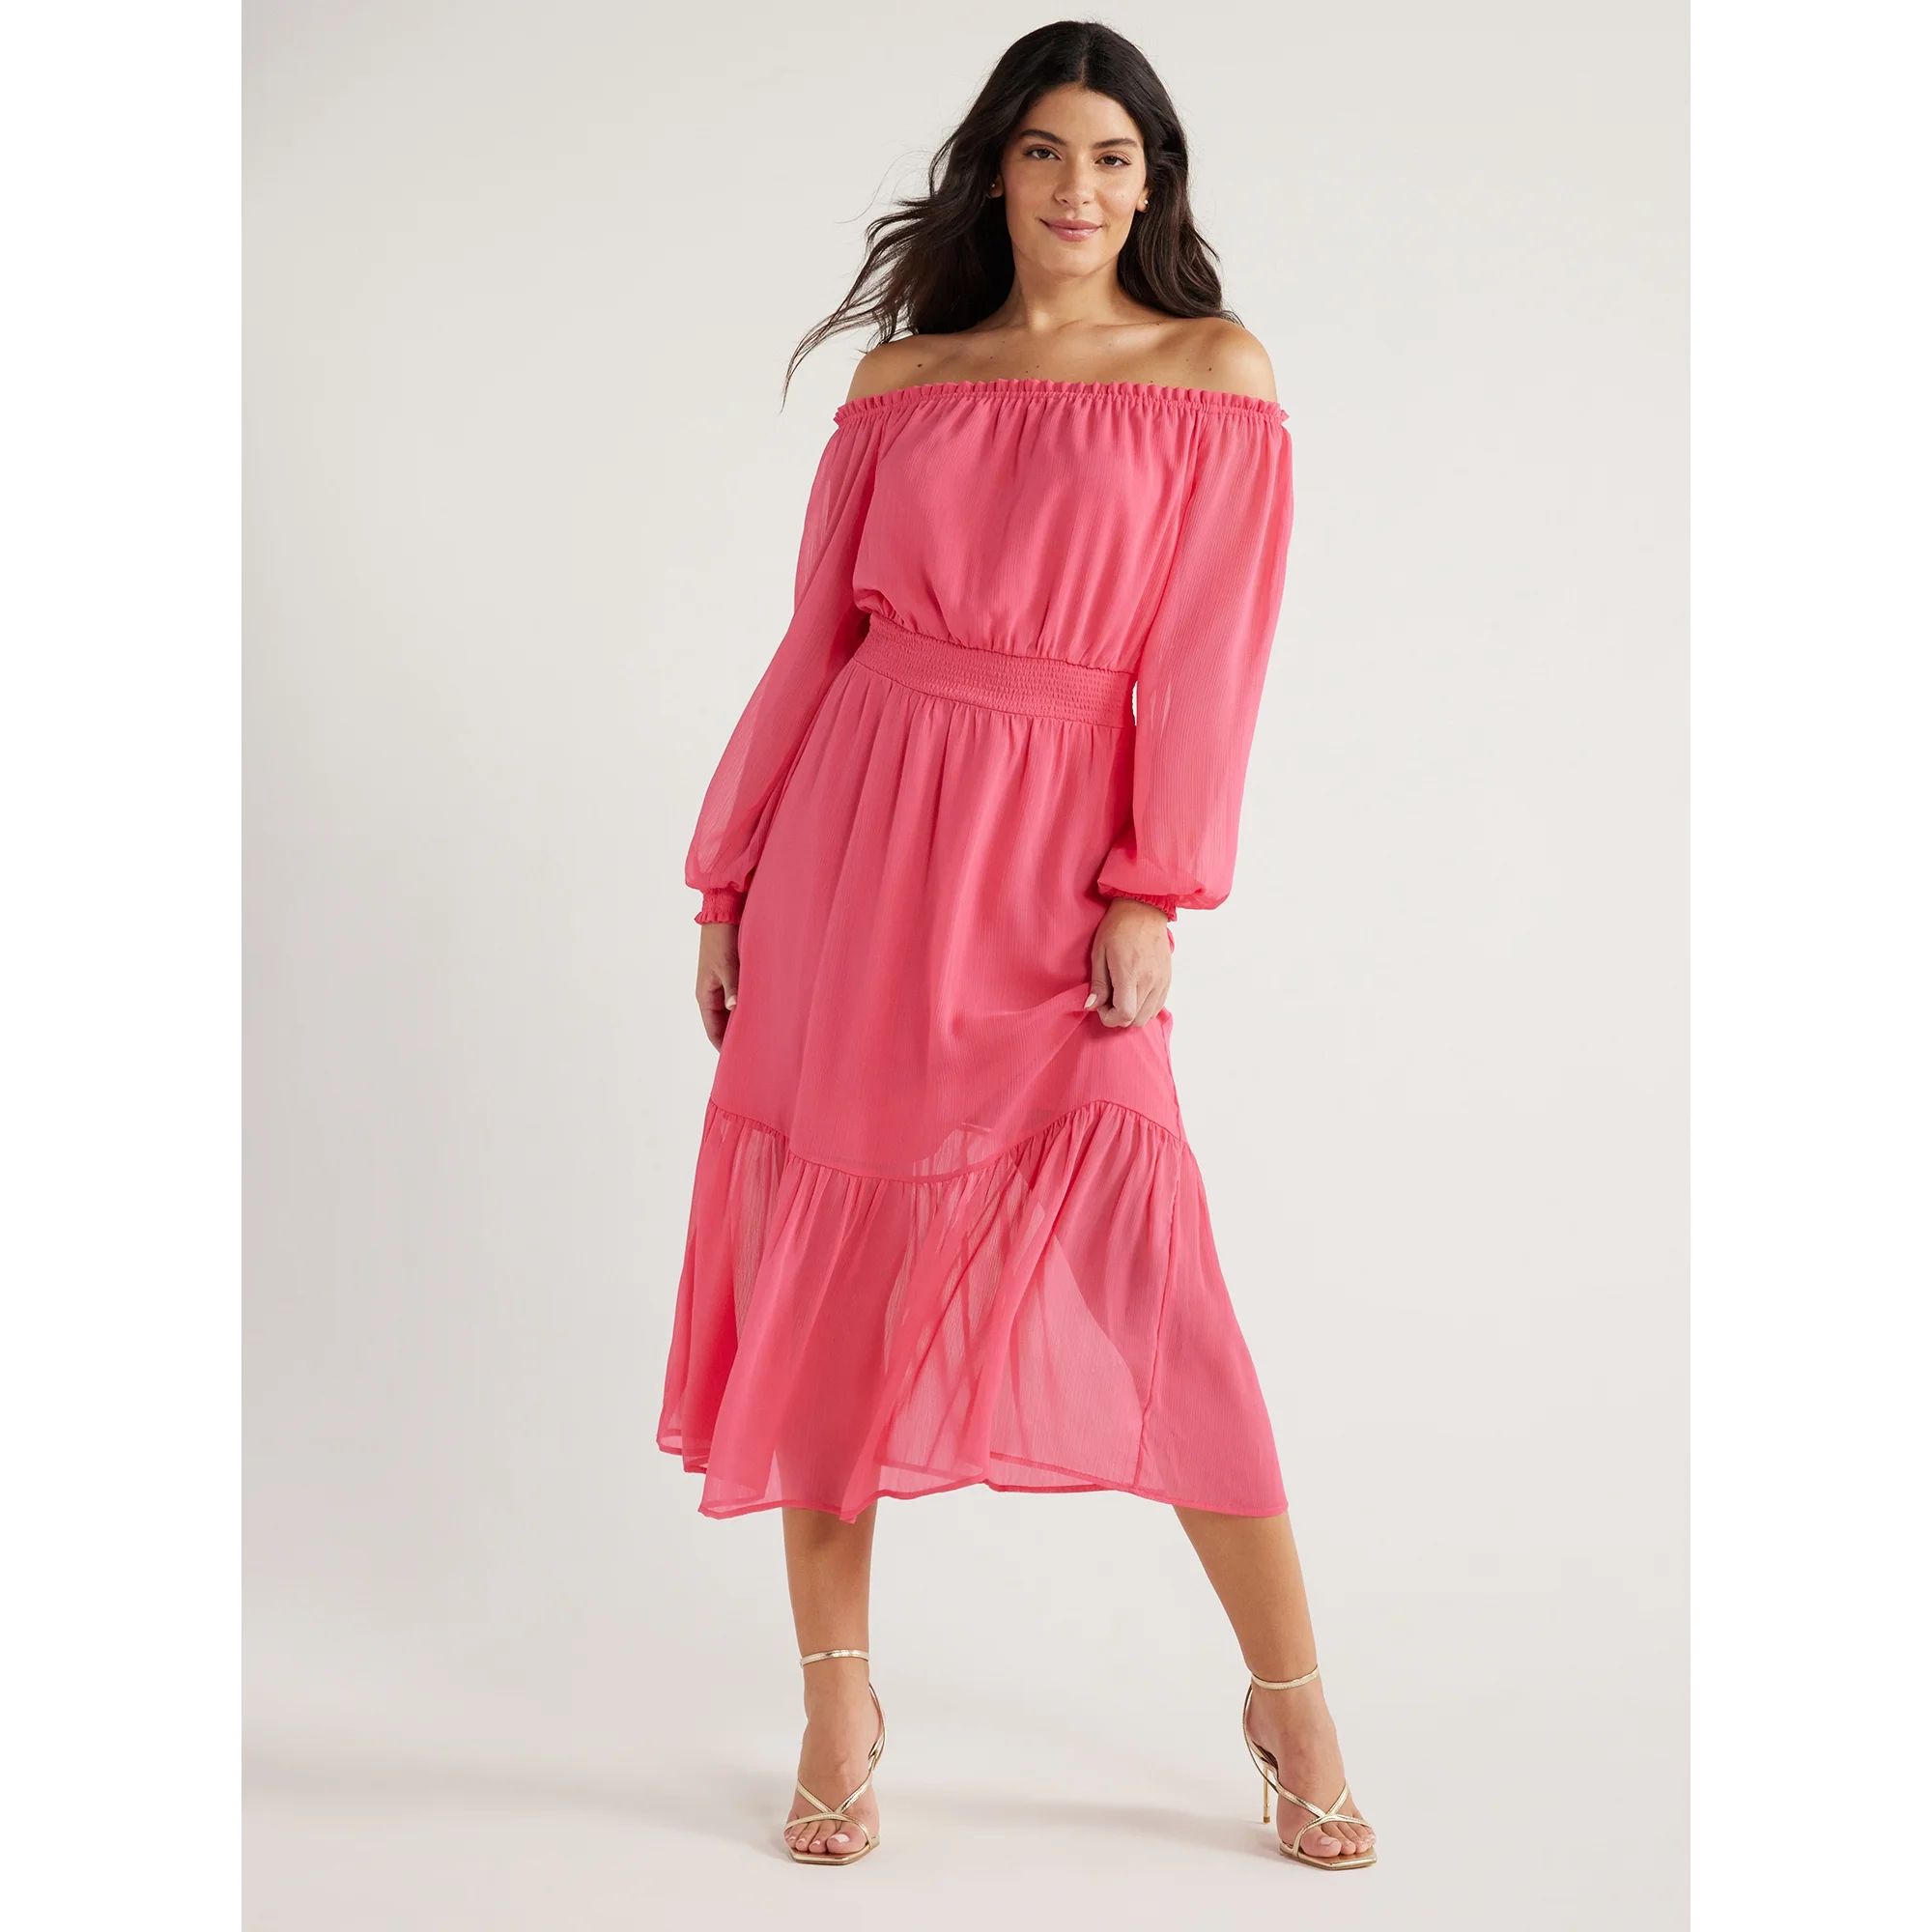 Sofia Jeans Women's and Women's Plus Off the Shoulder Dress with Blouson Sleeves, Sizes XS-5X | Walmart (US)